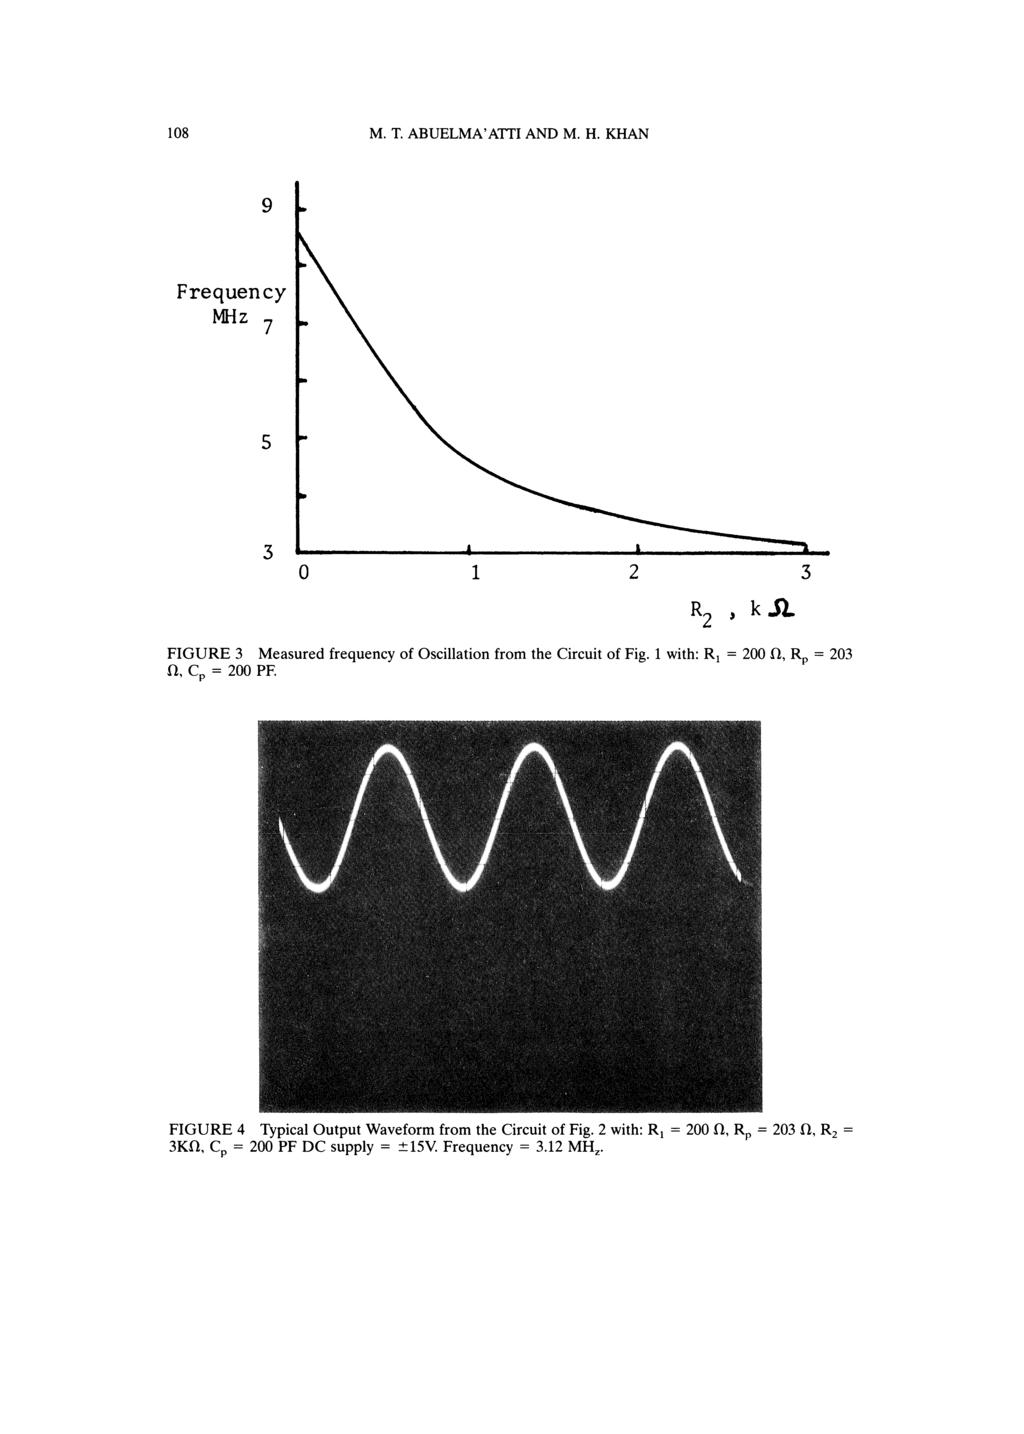 108 M.T. ABUELMA ATTI AND M. H. KHAN Frequency MHz 7 3 0 1 2 3 R 2 k.1.. FIGURE 3 Measured frequency of Oscillation from the Circuit of Fig.